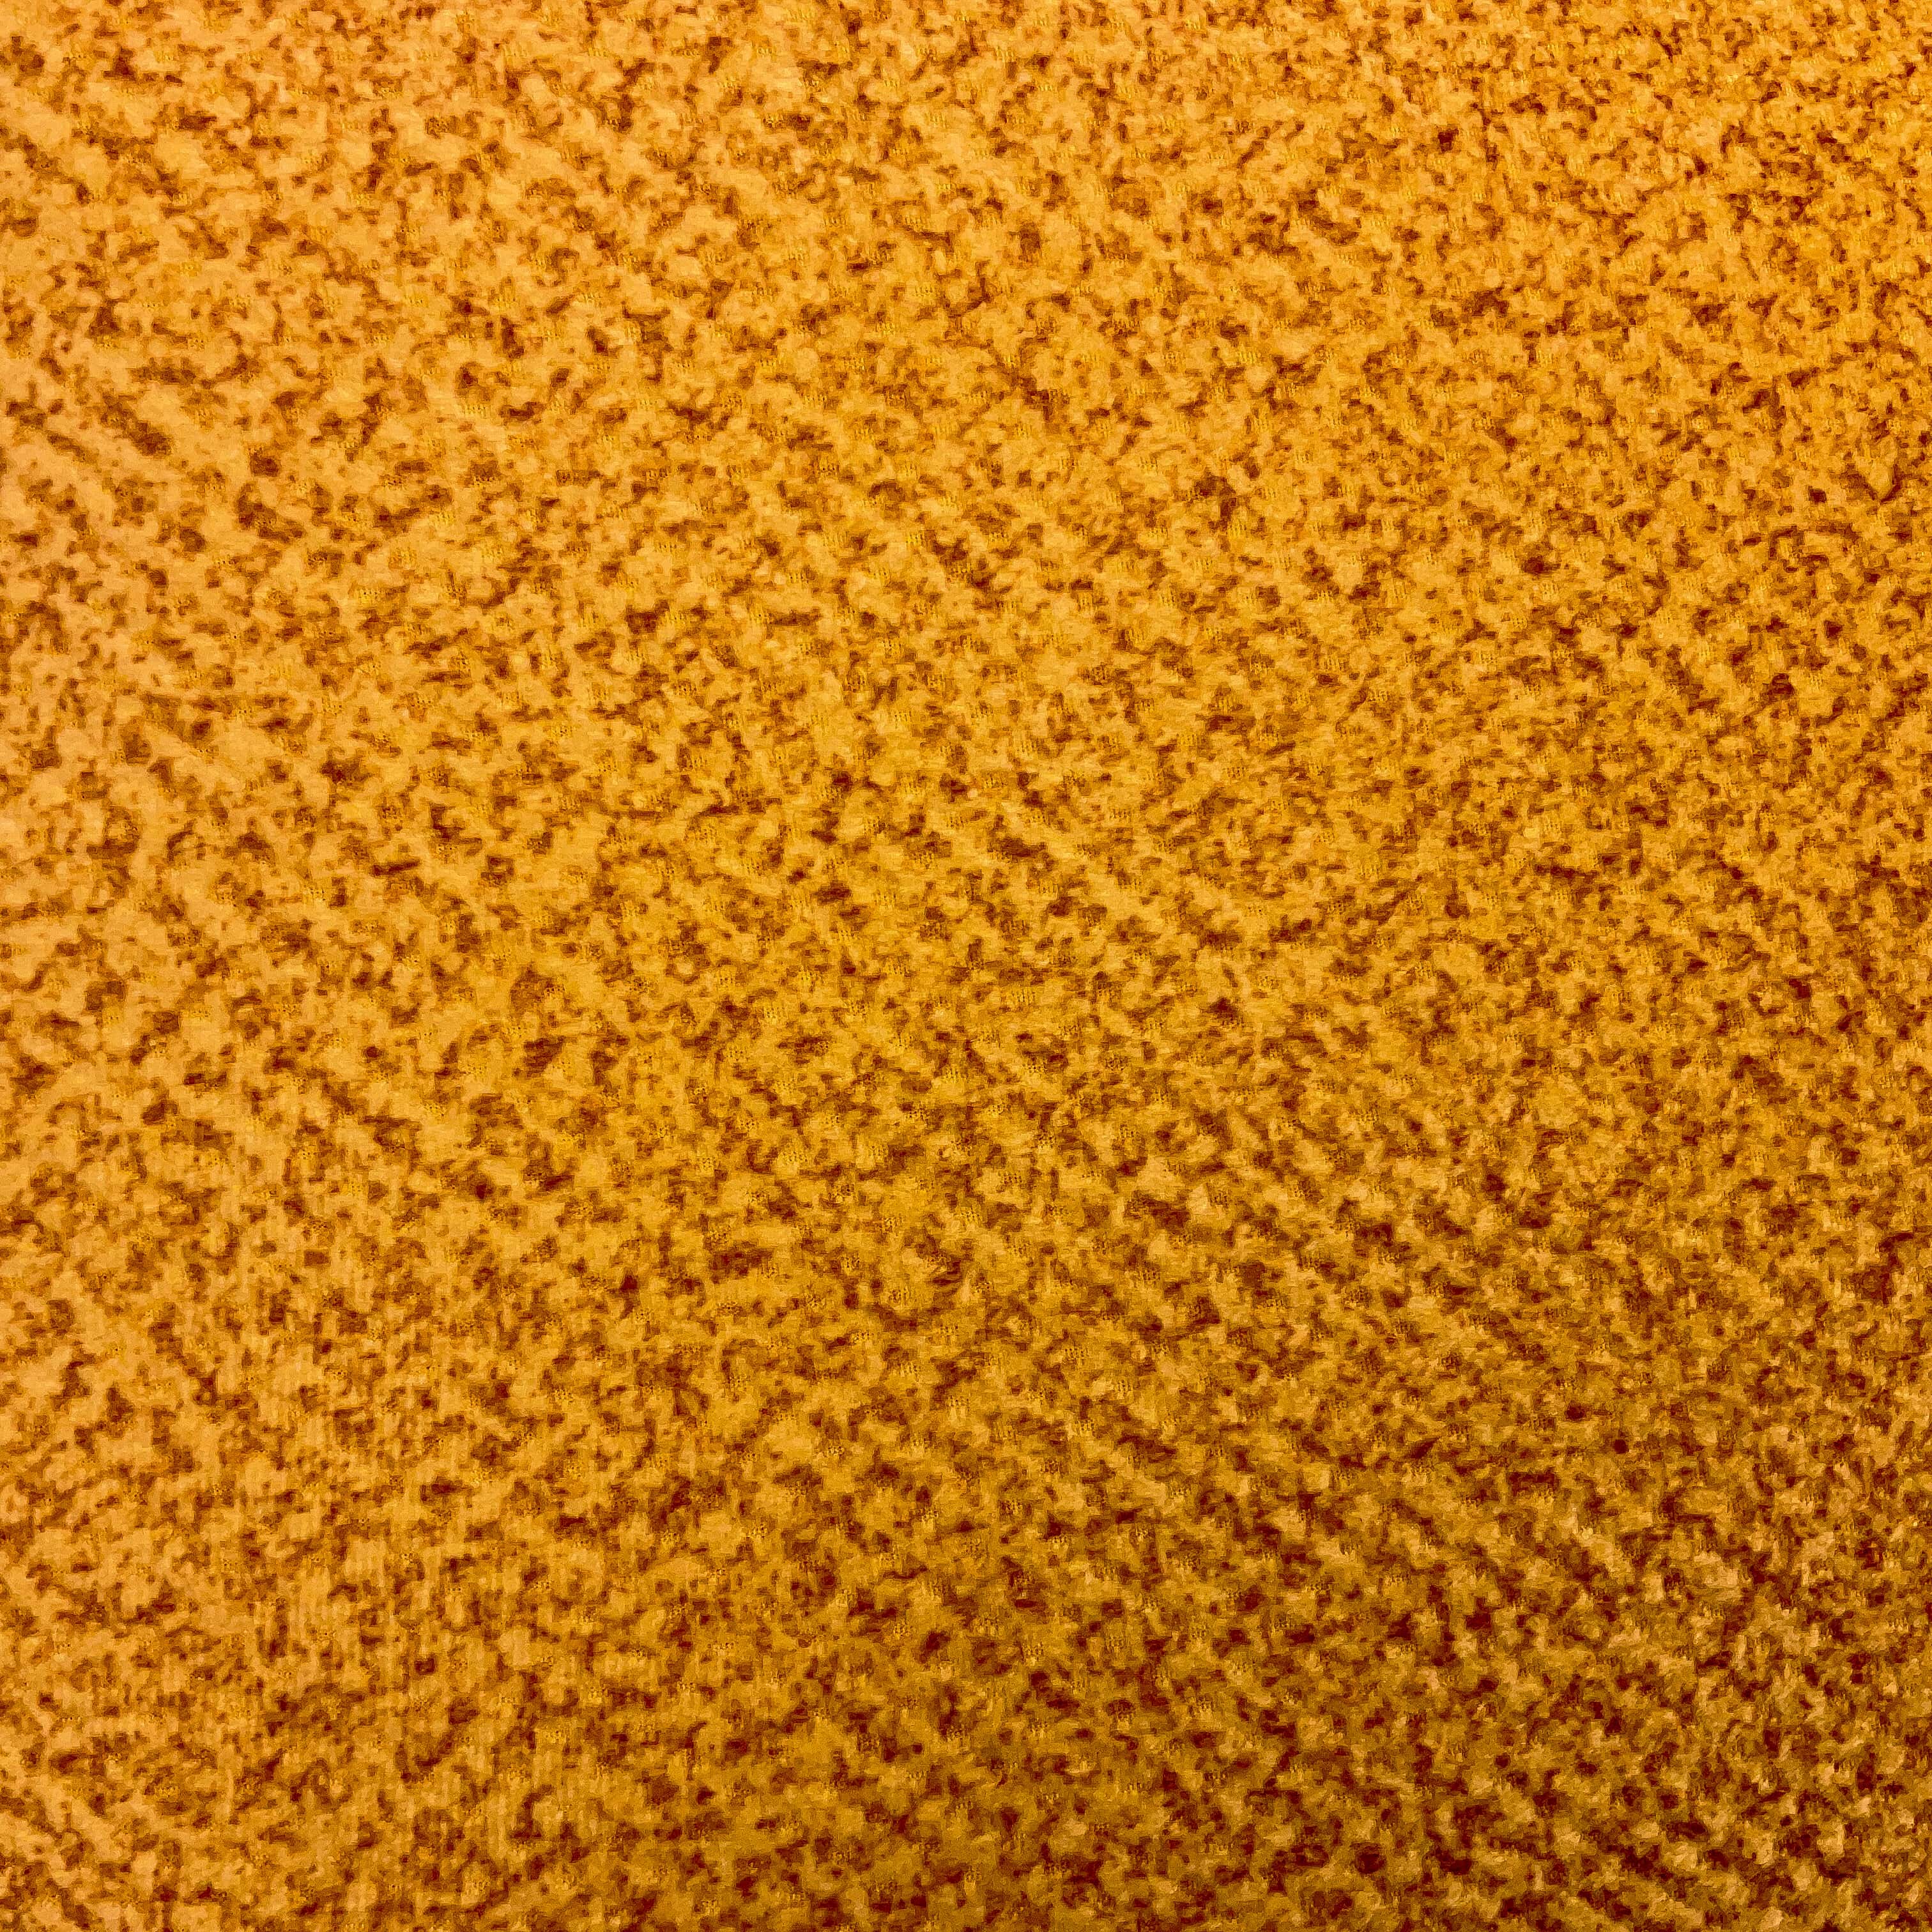 A closeup image of a yellow mustard plain suede cushion showing the inherent pattern